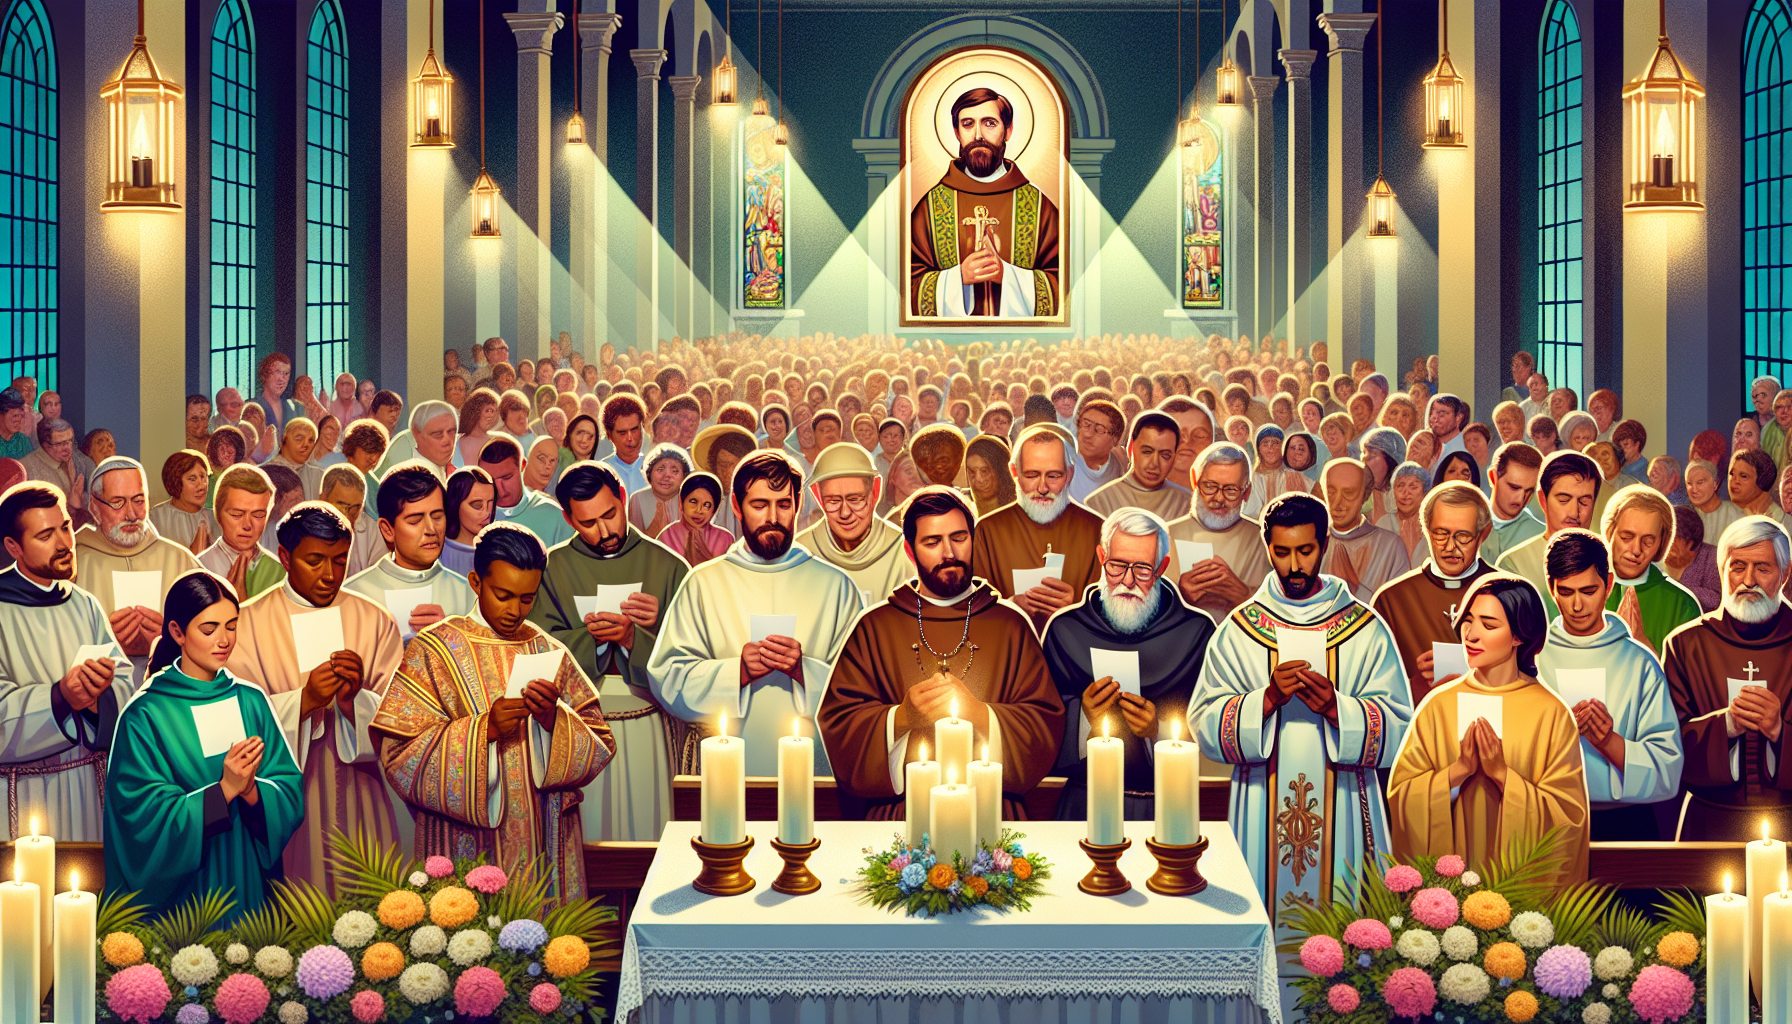 Create an image of a serene Catholic church during celebration, with devotees gathered and candles lit, as they honor Padre Pío. Illustrate people holding prayer cards and wearing traditional clothing